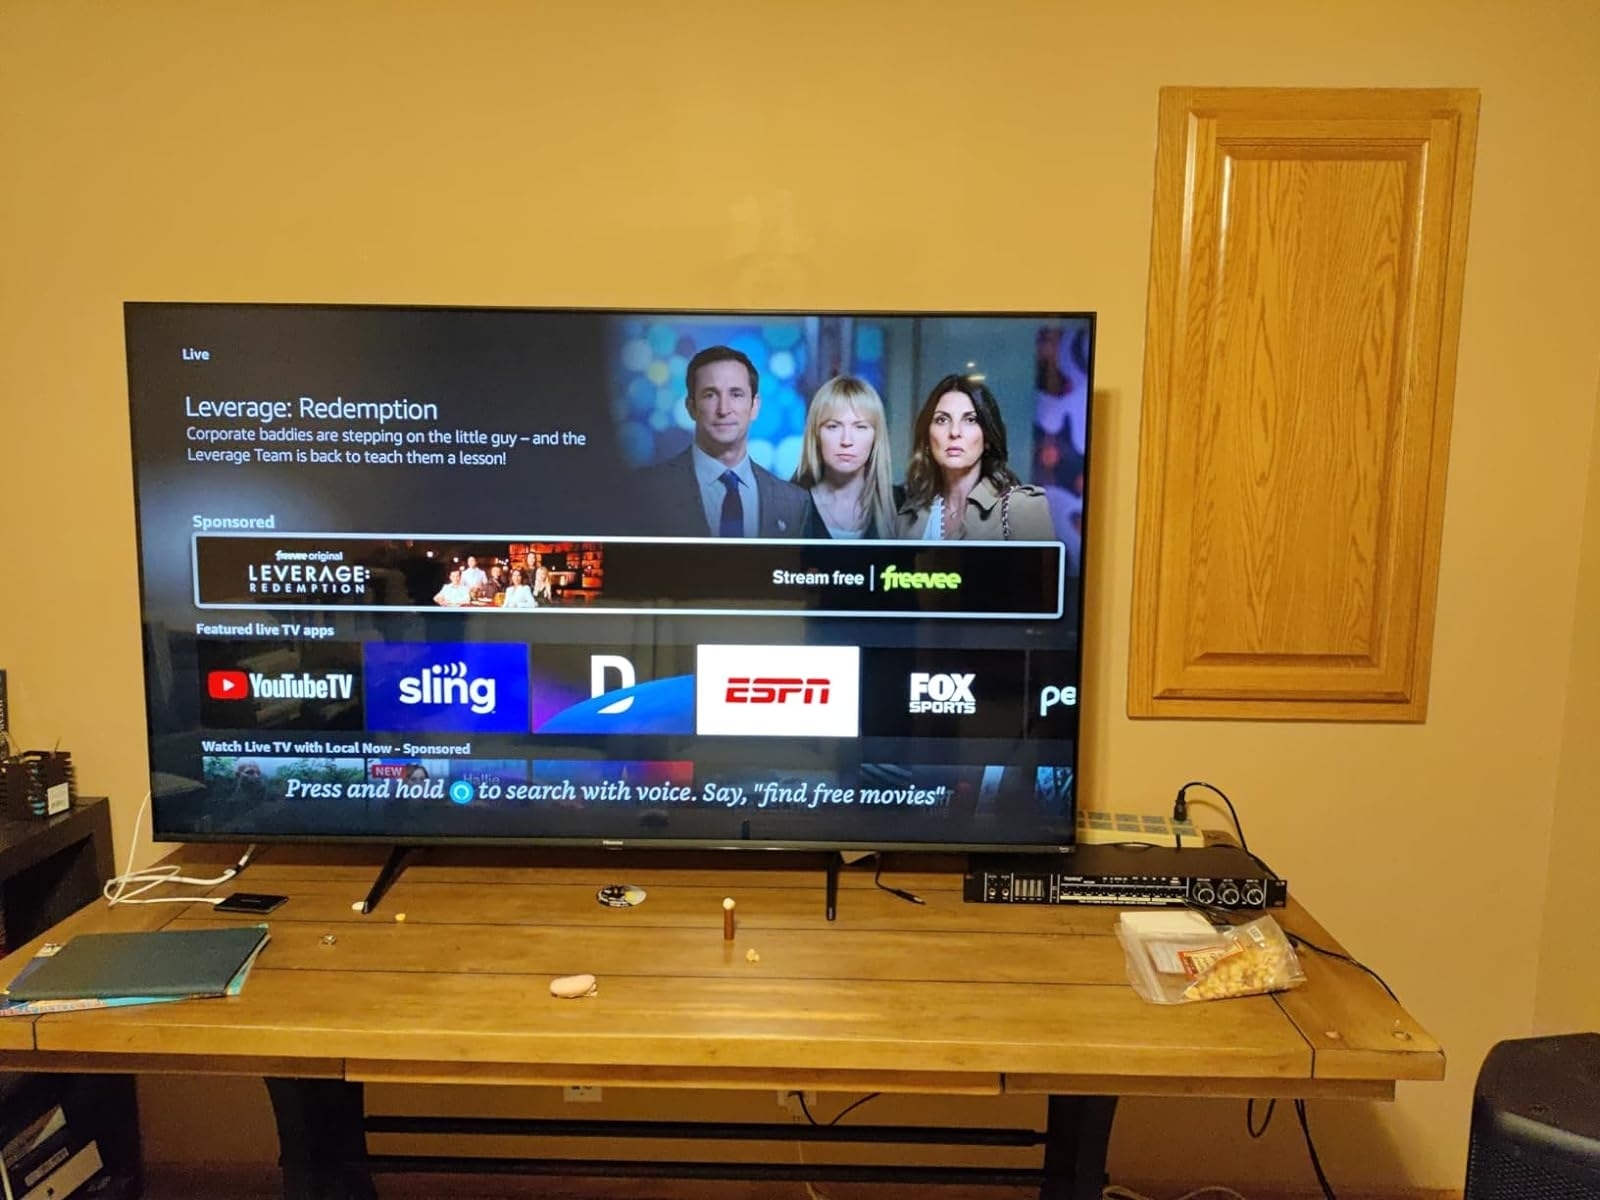 Smart TV displaying &#x27;Leverage: Redemption&#x27; ad on a user interface, with remote on table in a living room setting